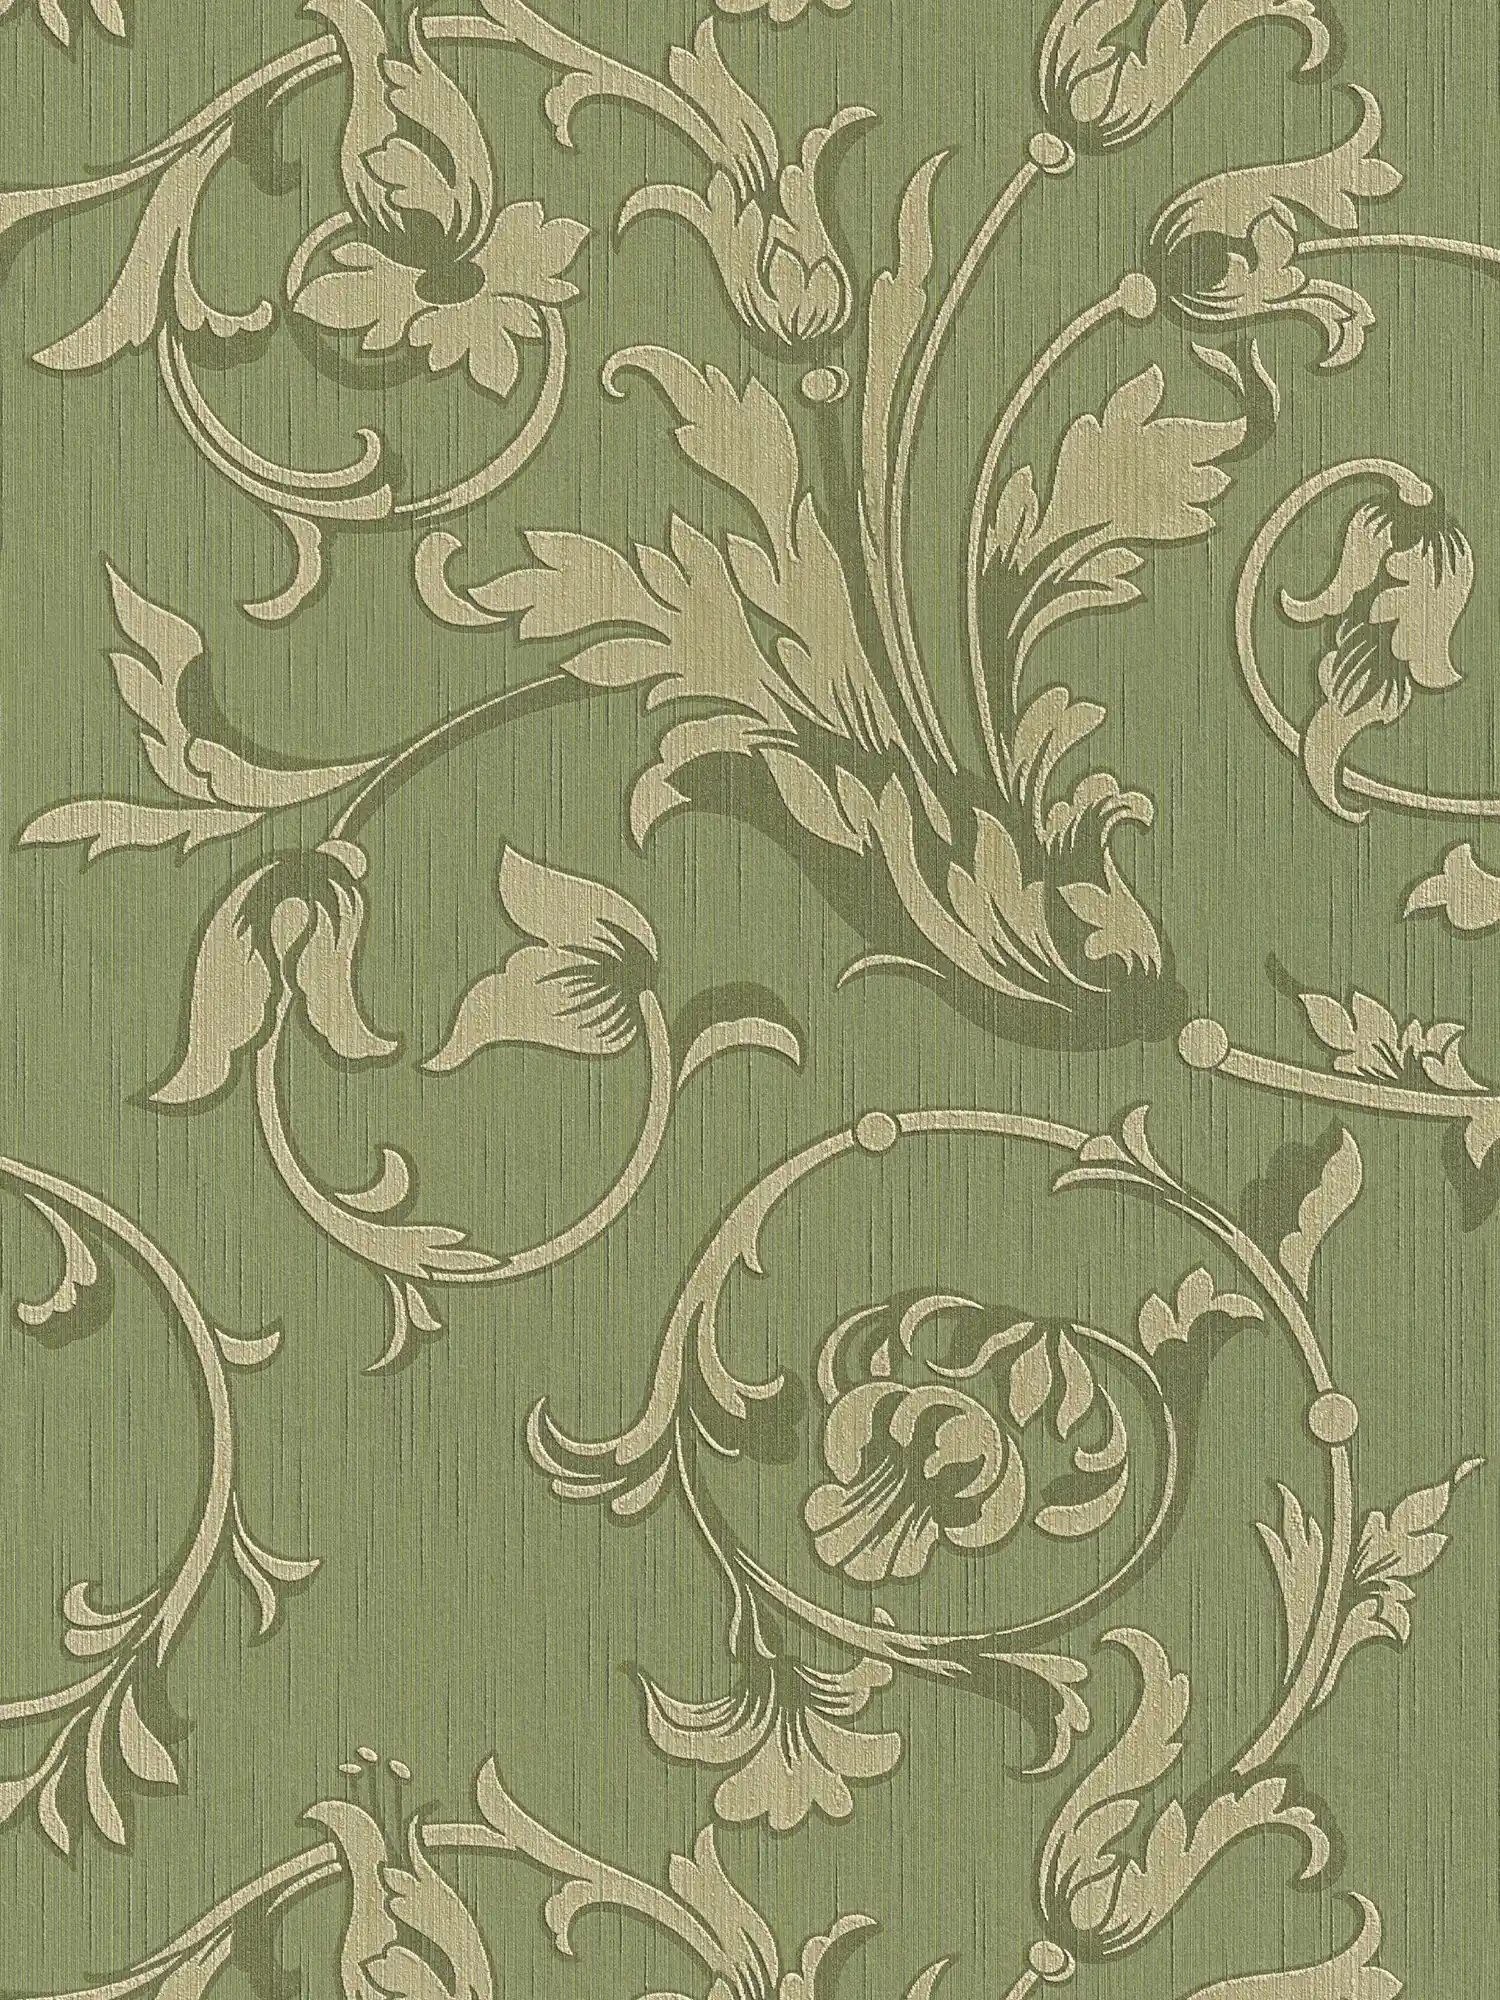 Non-woven wallpaper floral ornaments with texture effect - green
